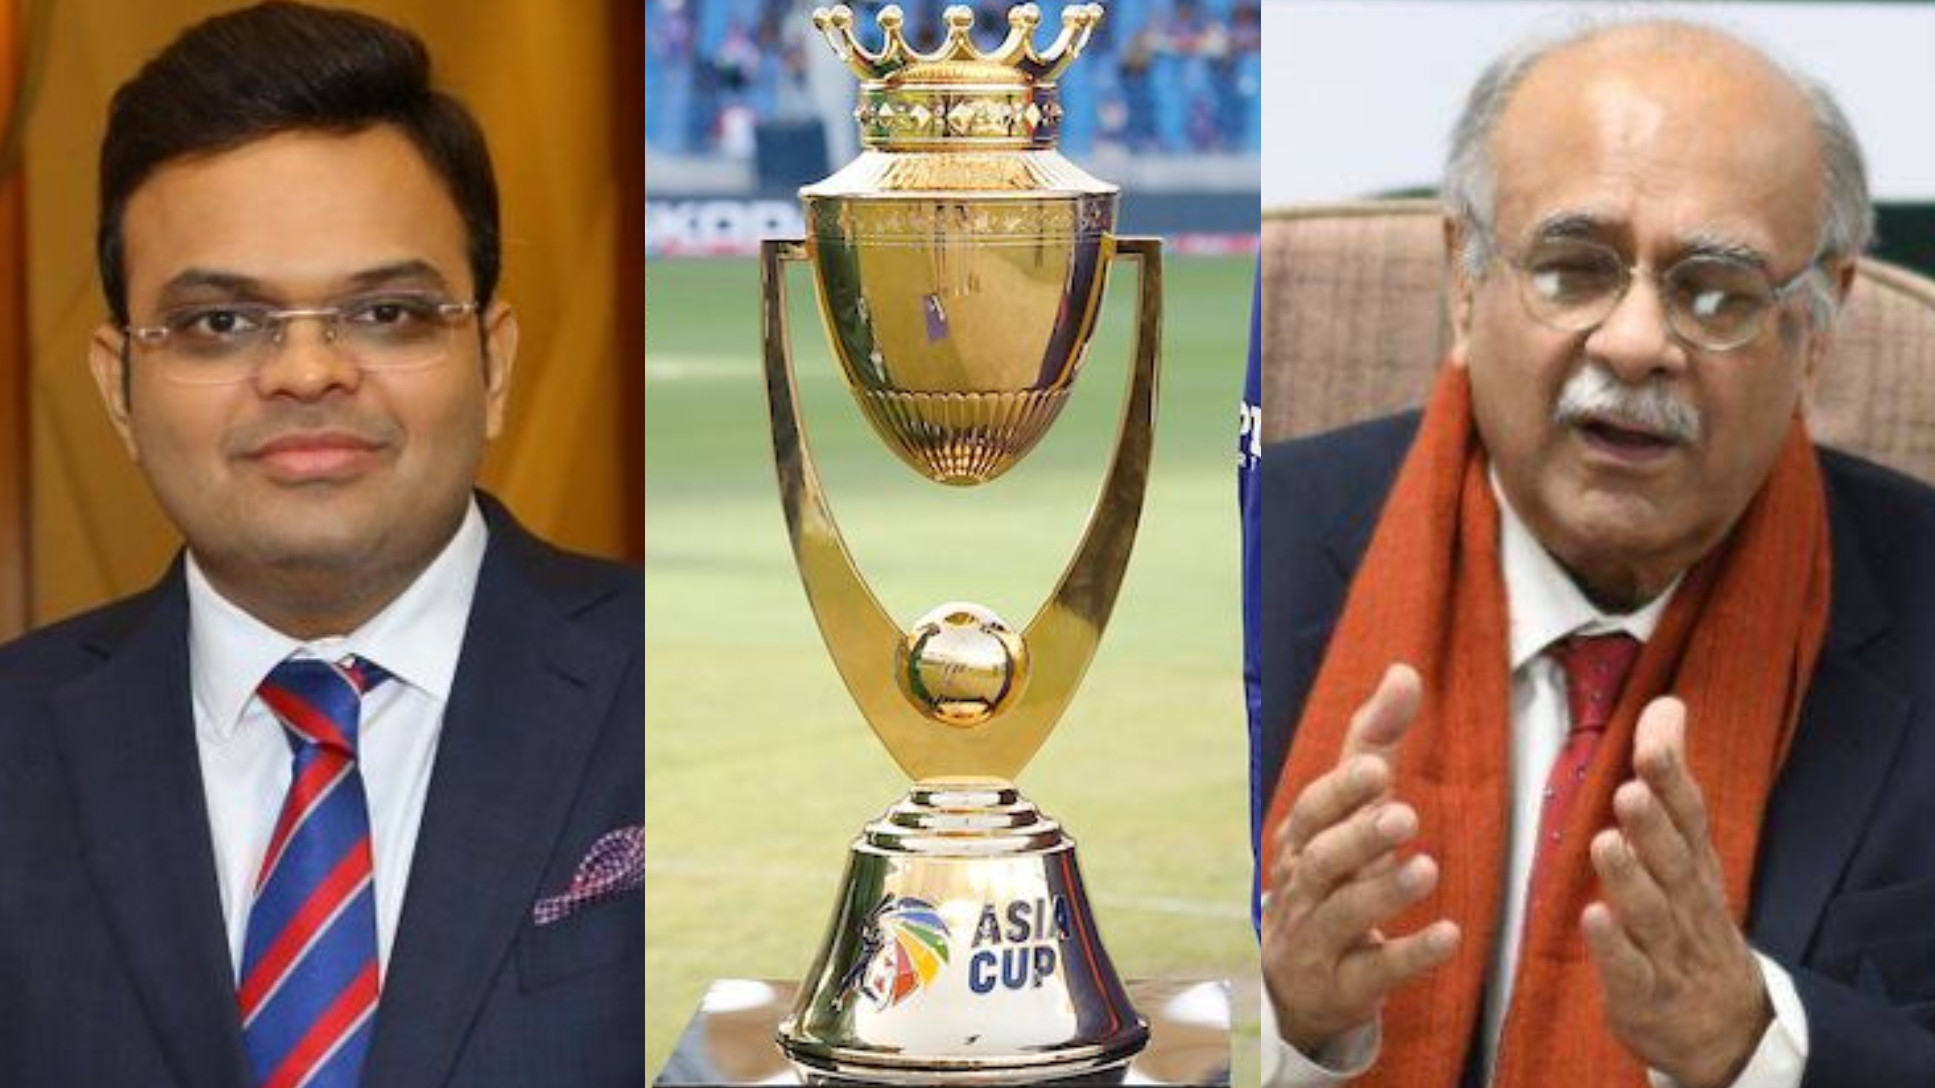 BCCI planning its five-nation tournament if Asia Cup 2023 is canceled as PCB stands firm on hybrid model - Report